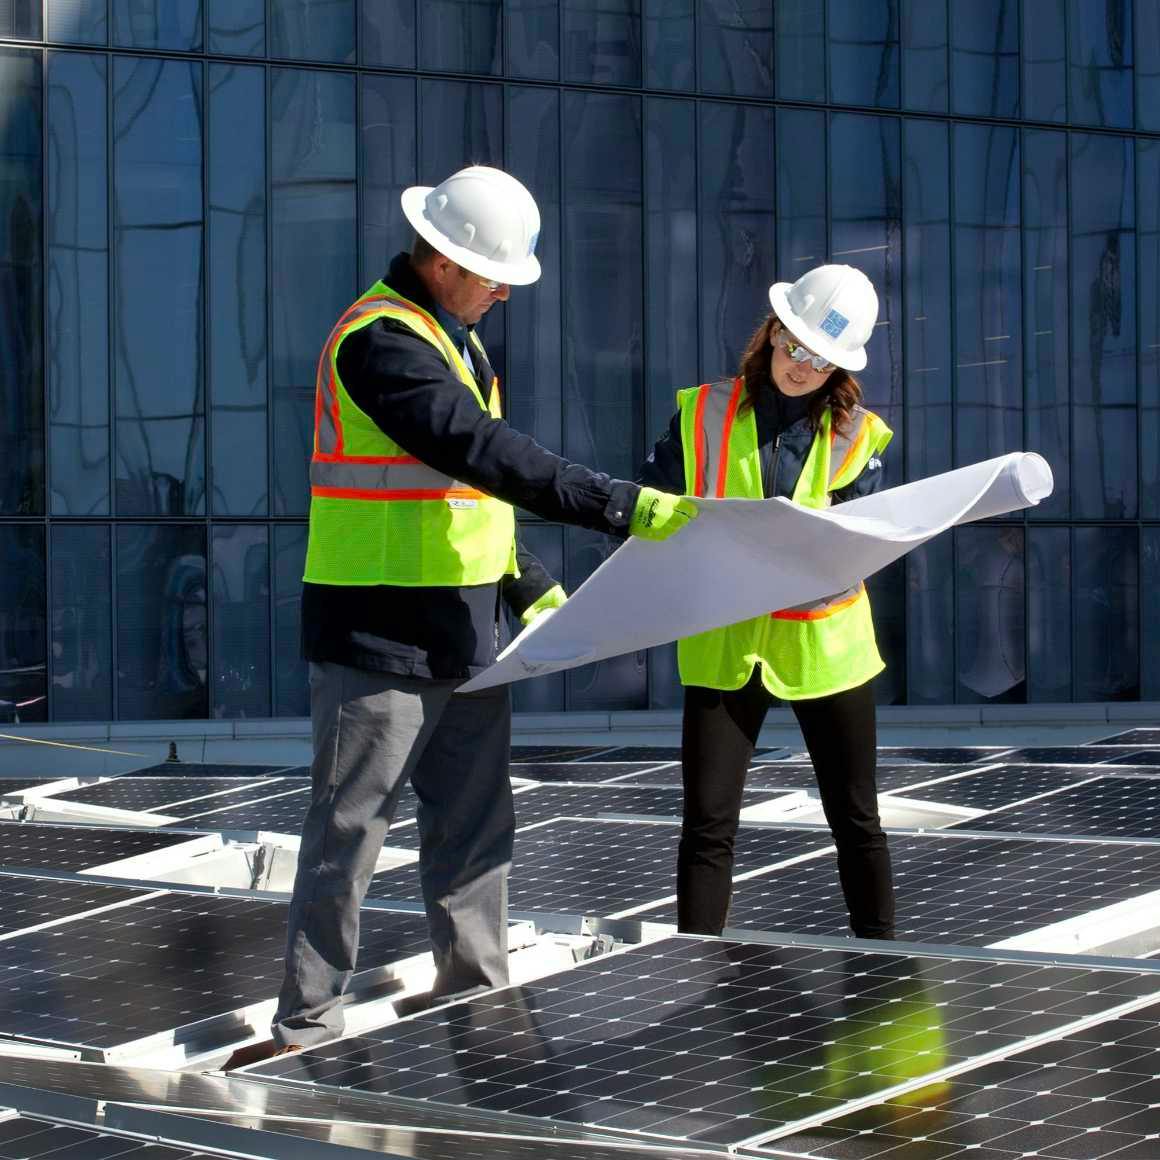 Infrastructure specialists standing among solar panels, reviewing plans at Long Beach Civic Center